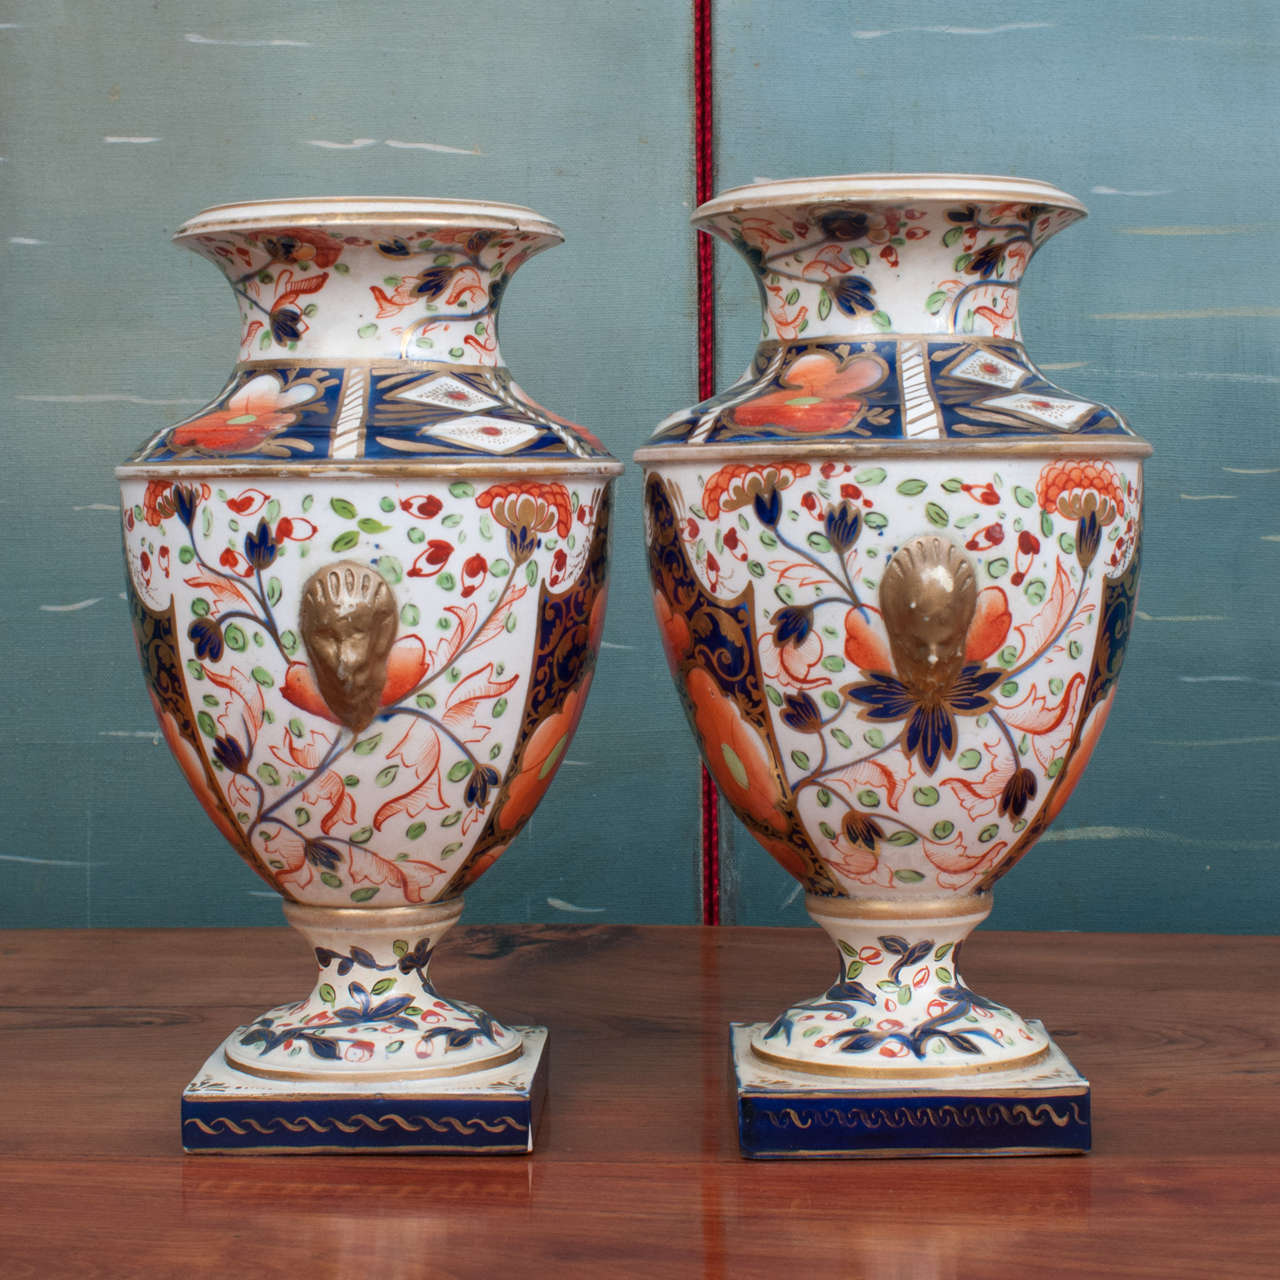 Ovid form vases - well marked in red on bottom of each urn - hybrid porcelain - these are old Derby marks prior to the company becoming Bloor Derby.